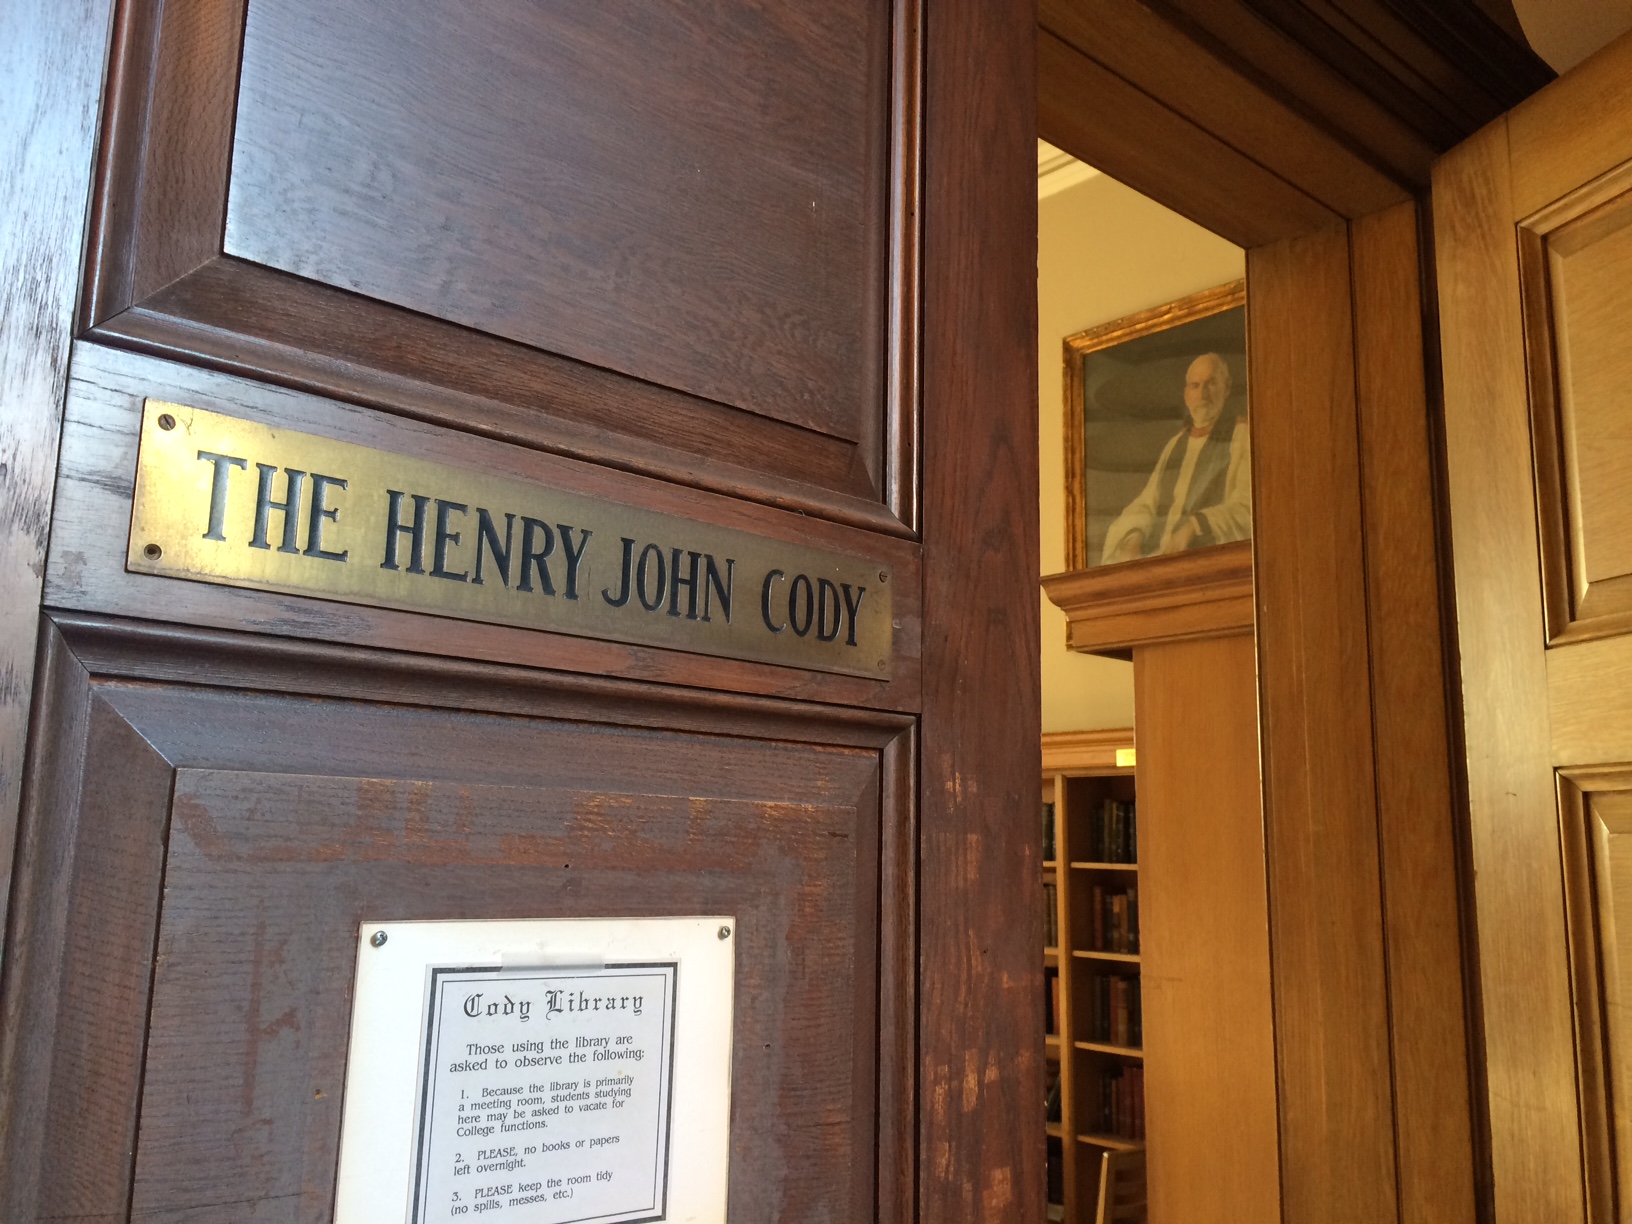 Dyson Hague's portrait is seen through the door of the Cody Library